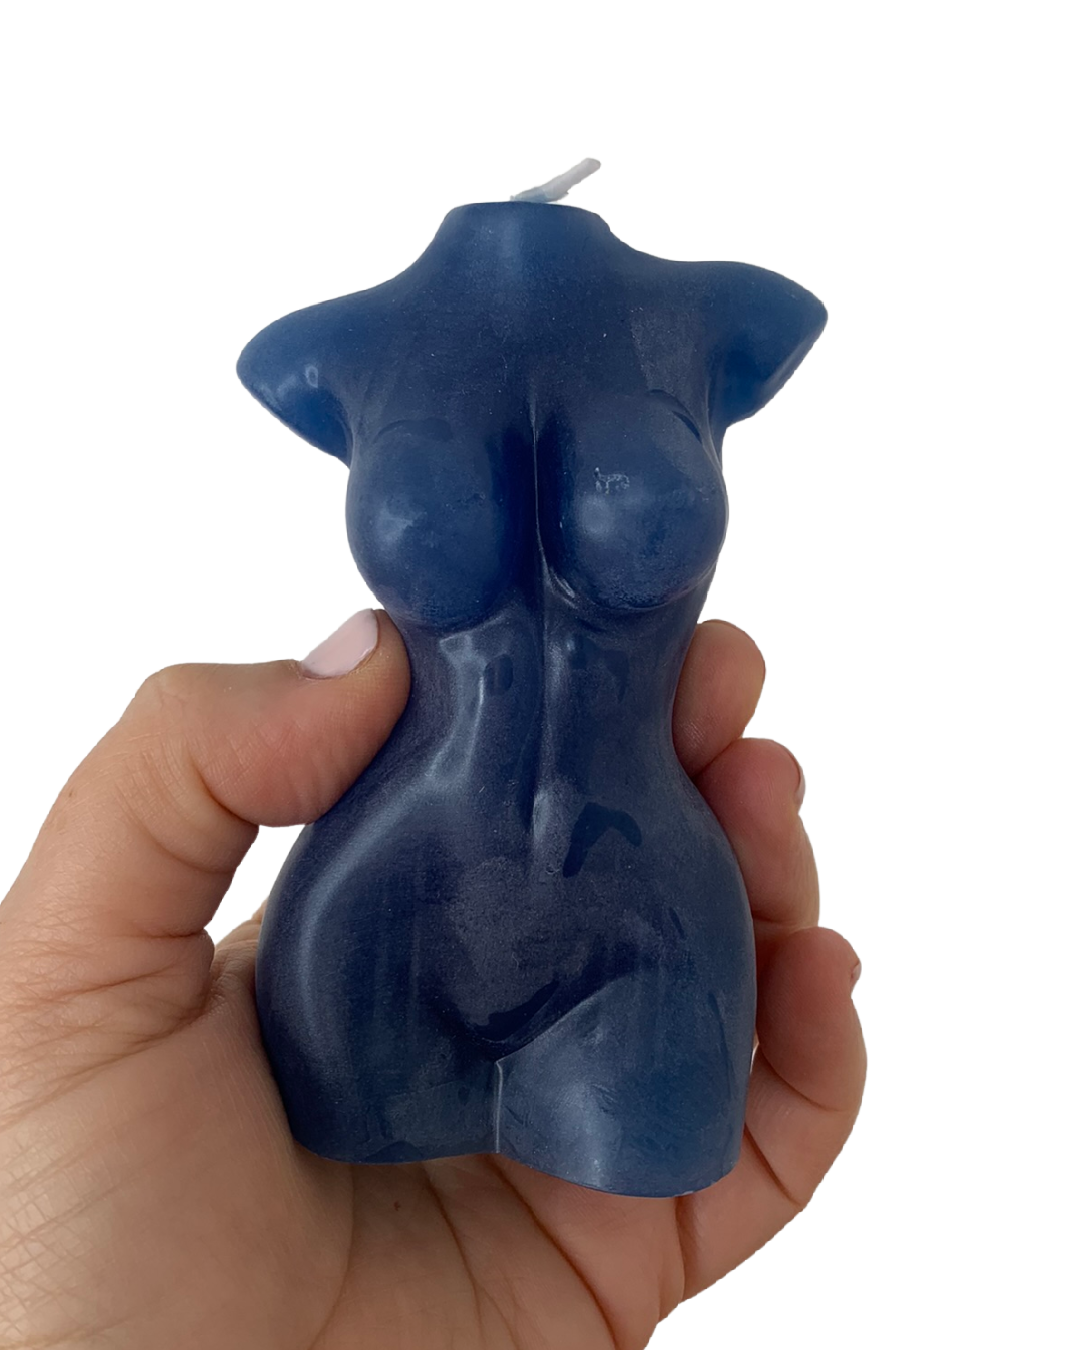 Lacire Torso Form 3 Drip Candles held in hand